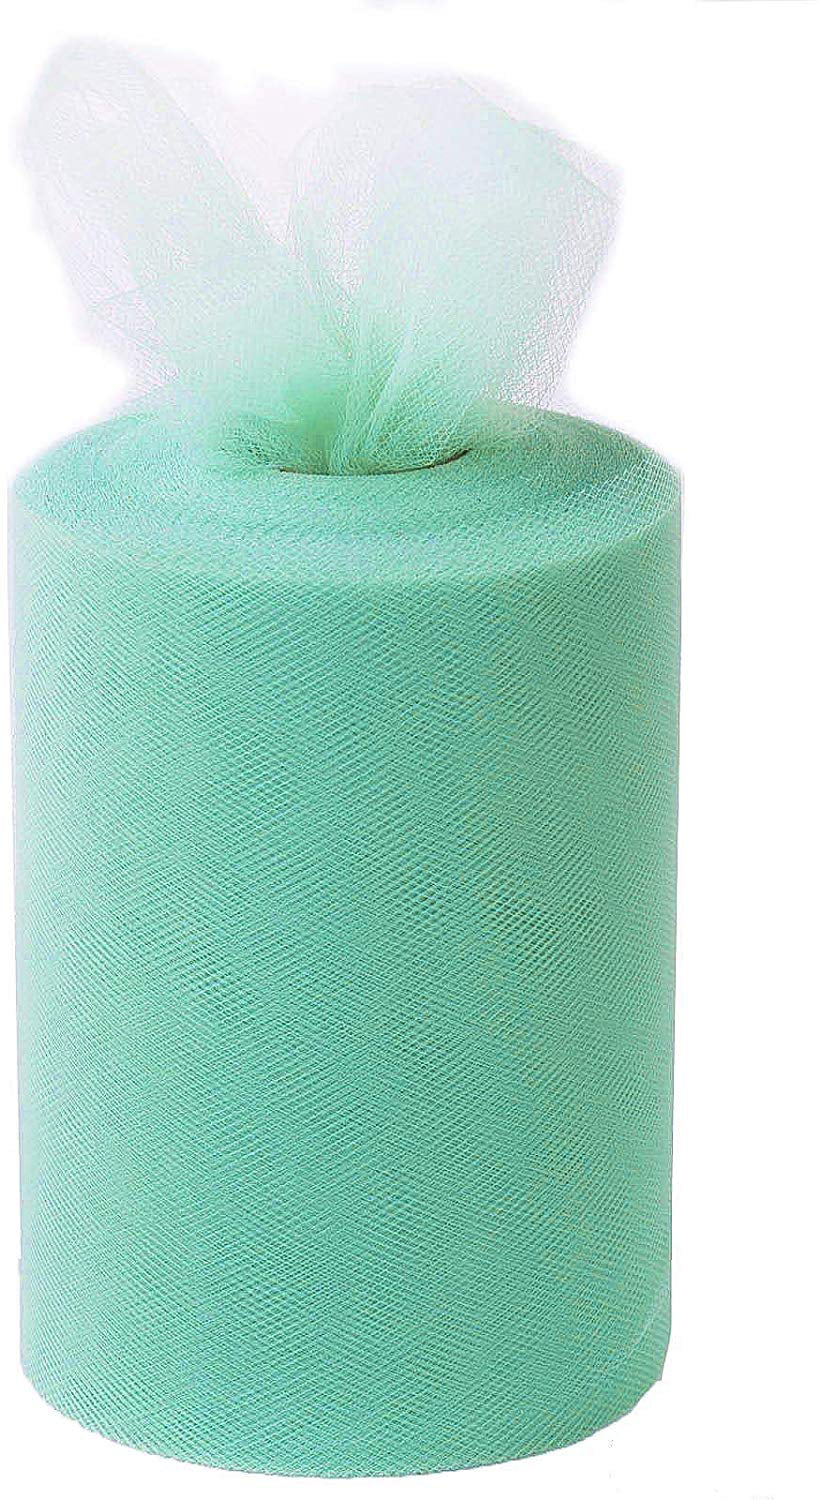 Decoration 6" Wide 100 Yard Roll Turquoise Tulle for Weddings Easter 